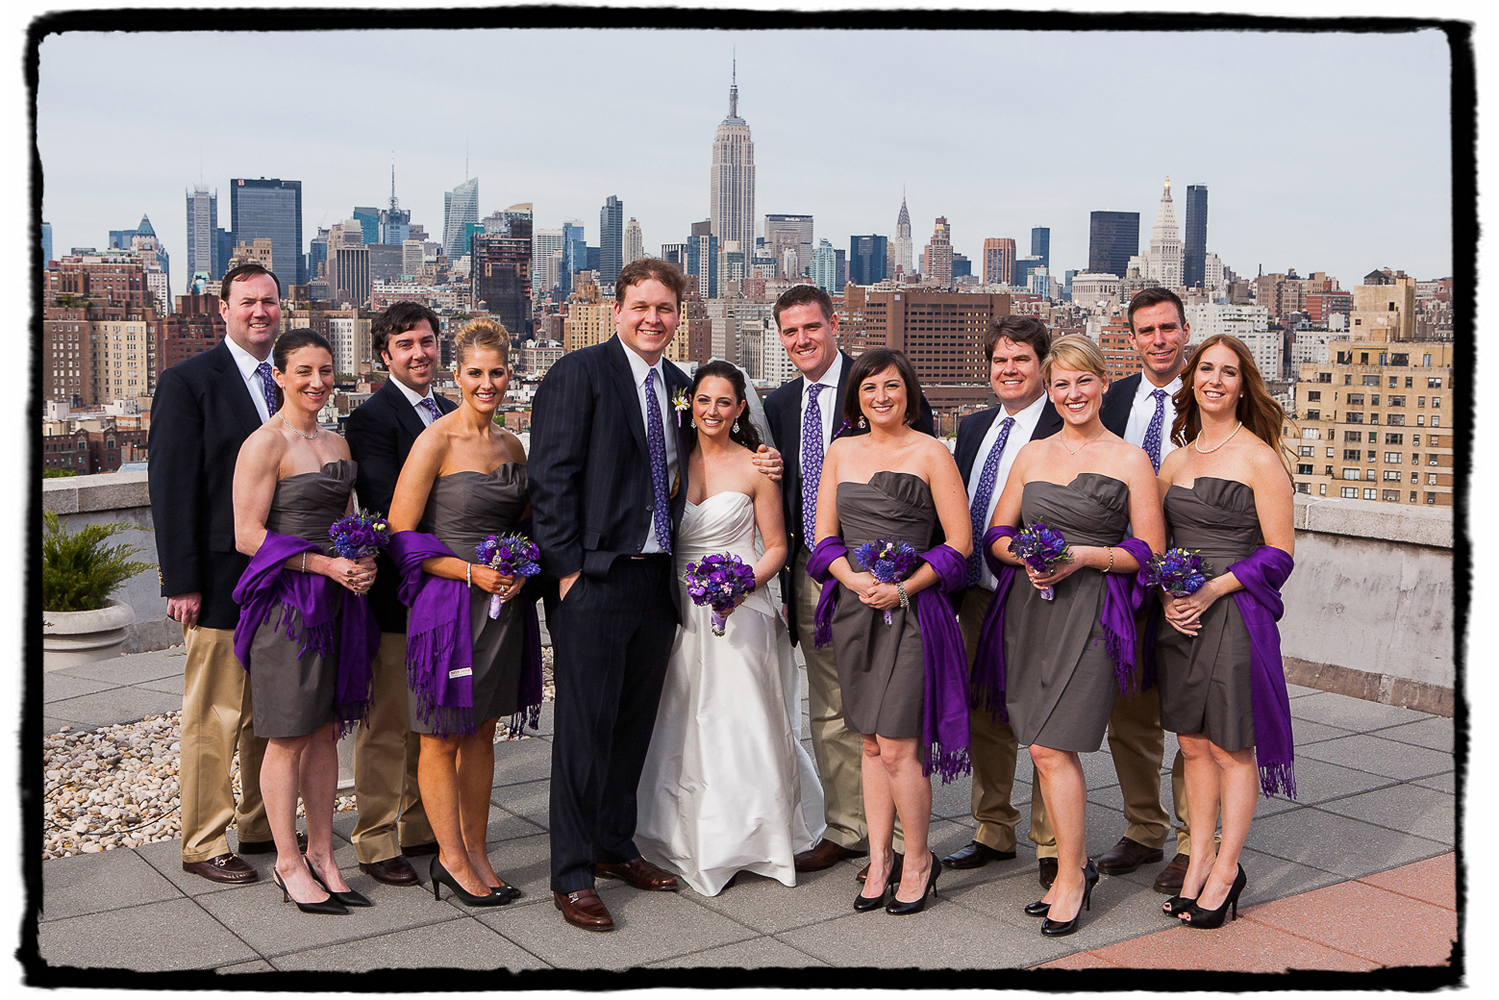 Peter and Allison's manhattan rooftop provided a great backdrop with the skyline.